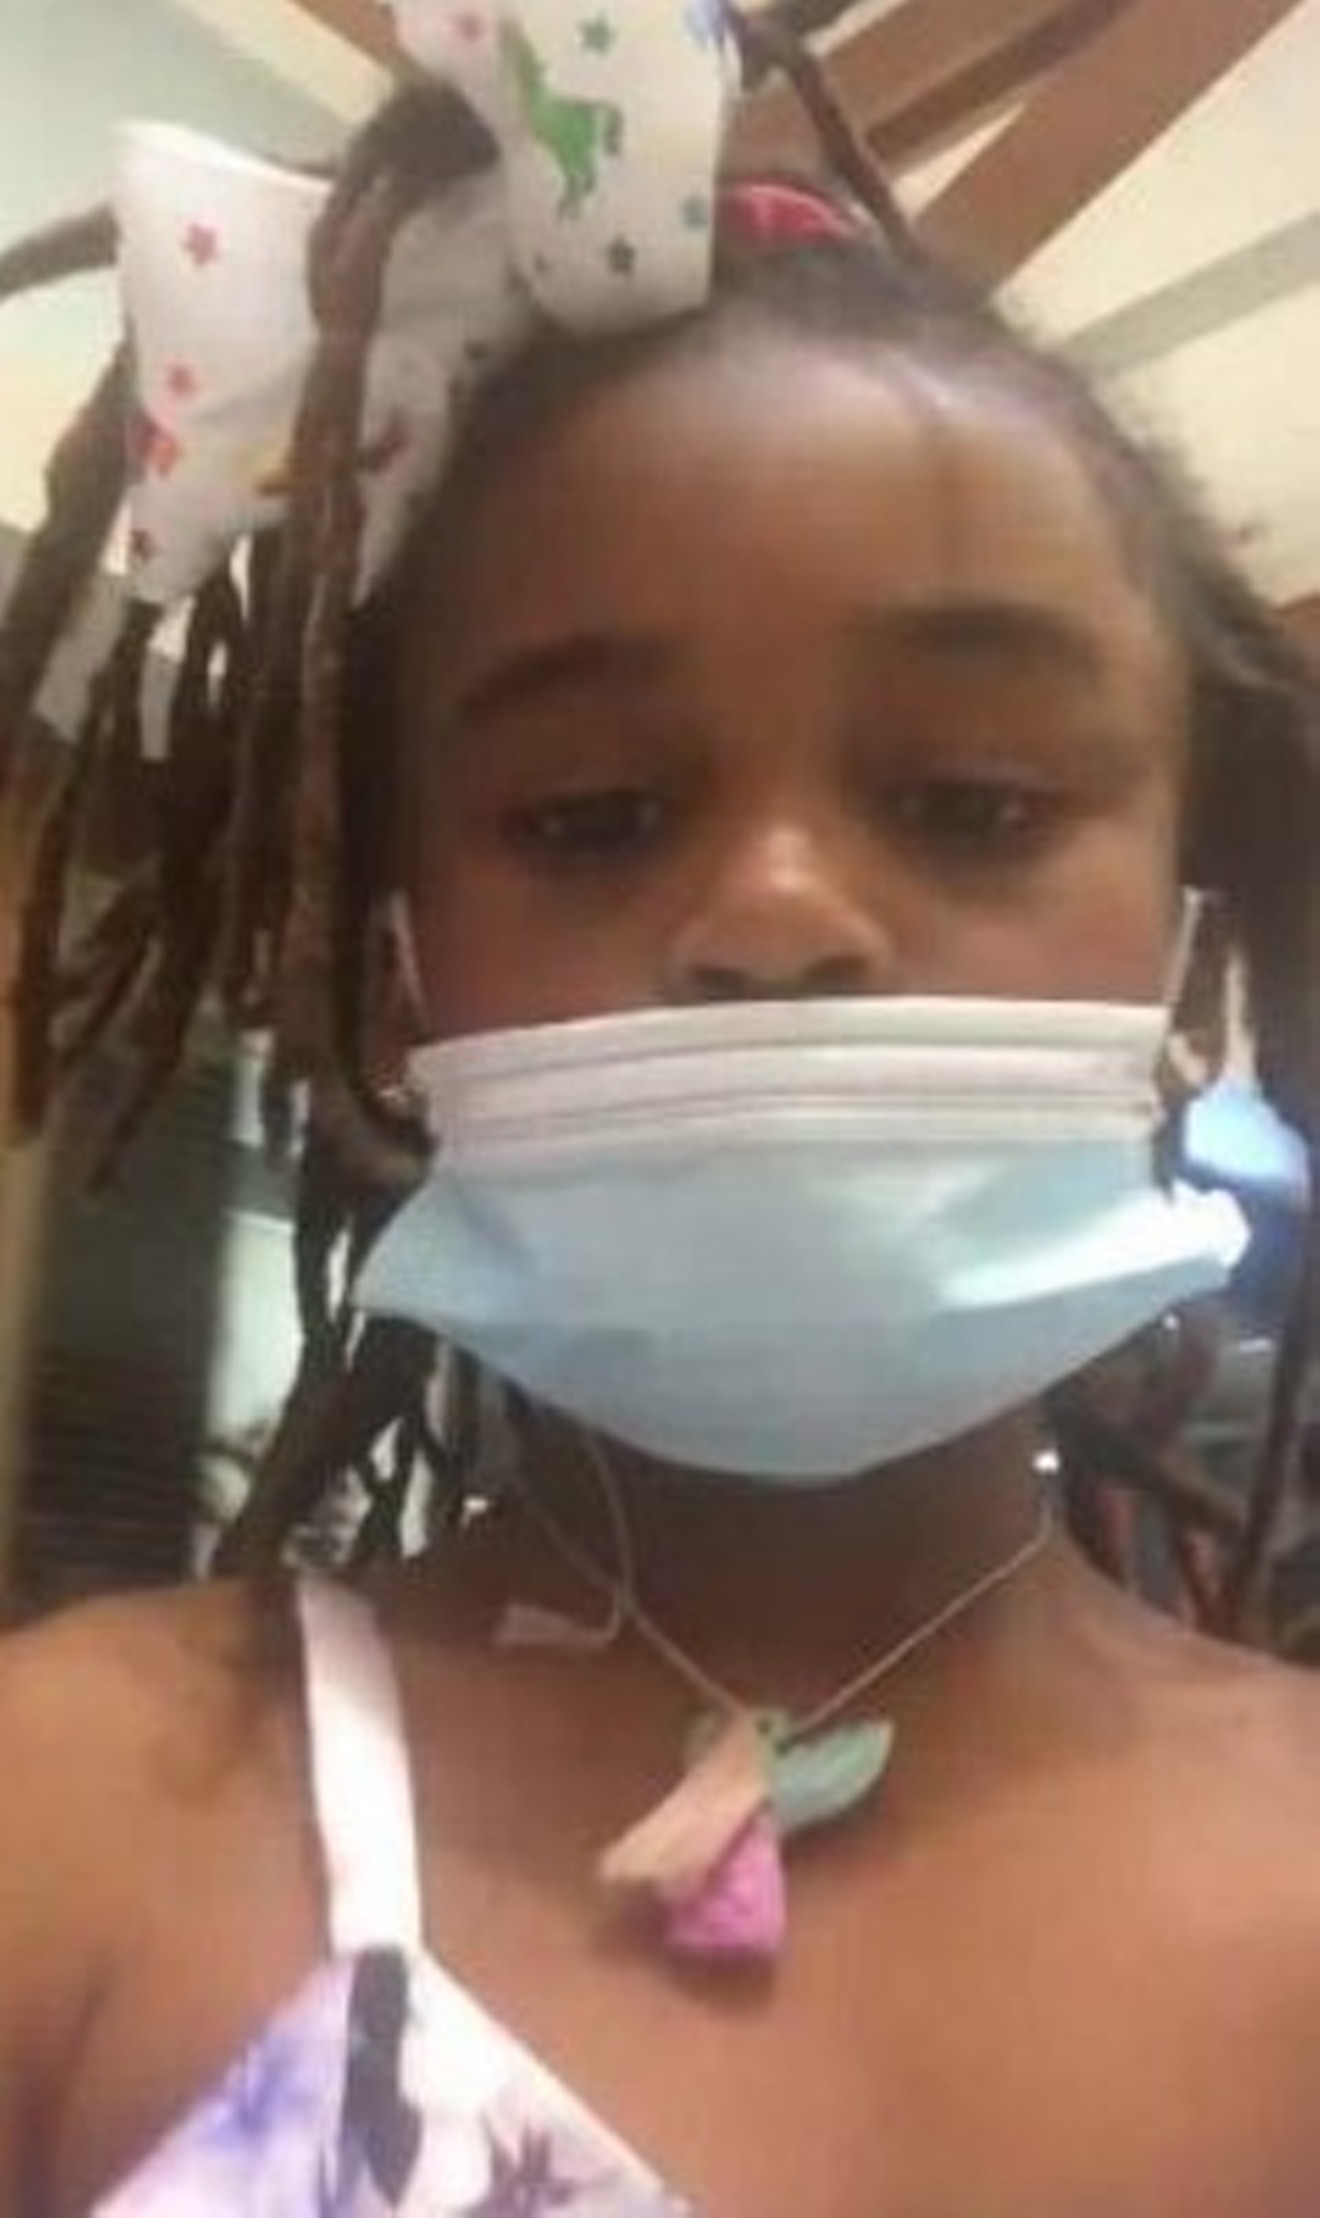 Lalani Erika Walton, 8, of Temple, Texas, died in 2021 while participating in the viral TikTok trend called the "blackout challenge," in which participants choke themselves until they lose consciousness.